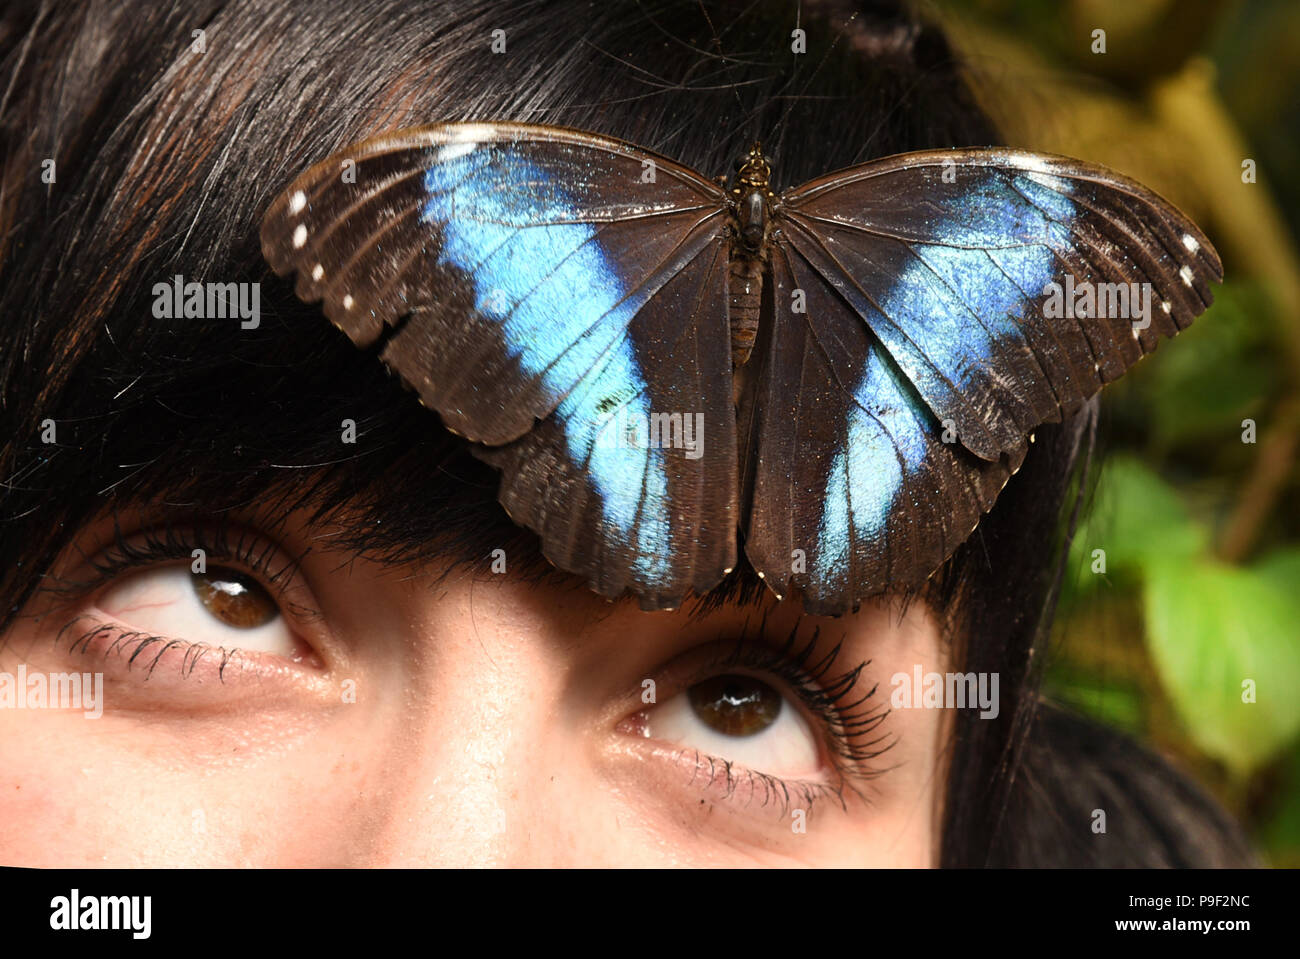 13 July 2018, Germany, Wittenberg Lutherstadt: A young woman observes a banded blue morpho(Morpho achilles) with a wing span of 11 centimetres sitting on her head at the Alaris butterfly park. An unusually high number of king swallowtail (Papilio thoas) are hatching these days at the around 1000-square-metre-big butterfly house with 140 butterfly species. More than 250 of these colourful butterflies with a wing span of 12-14 centimetres have left their cocoons and romp about the tropical plants at 24 degrees and a humidity of 85 percent. Photo: Waltraud Grubitzsch/dpa-Zentralbild/ZB Stock Photo